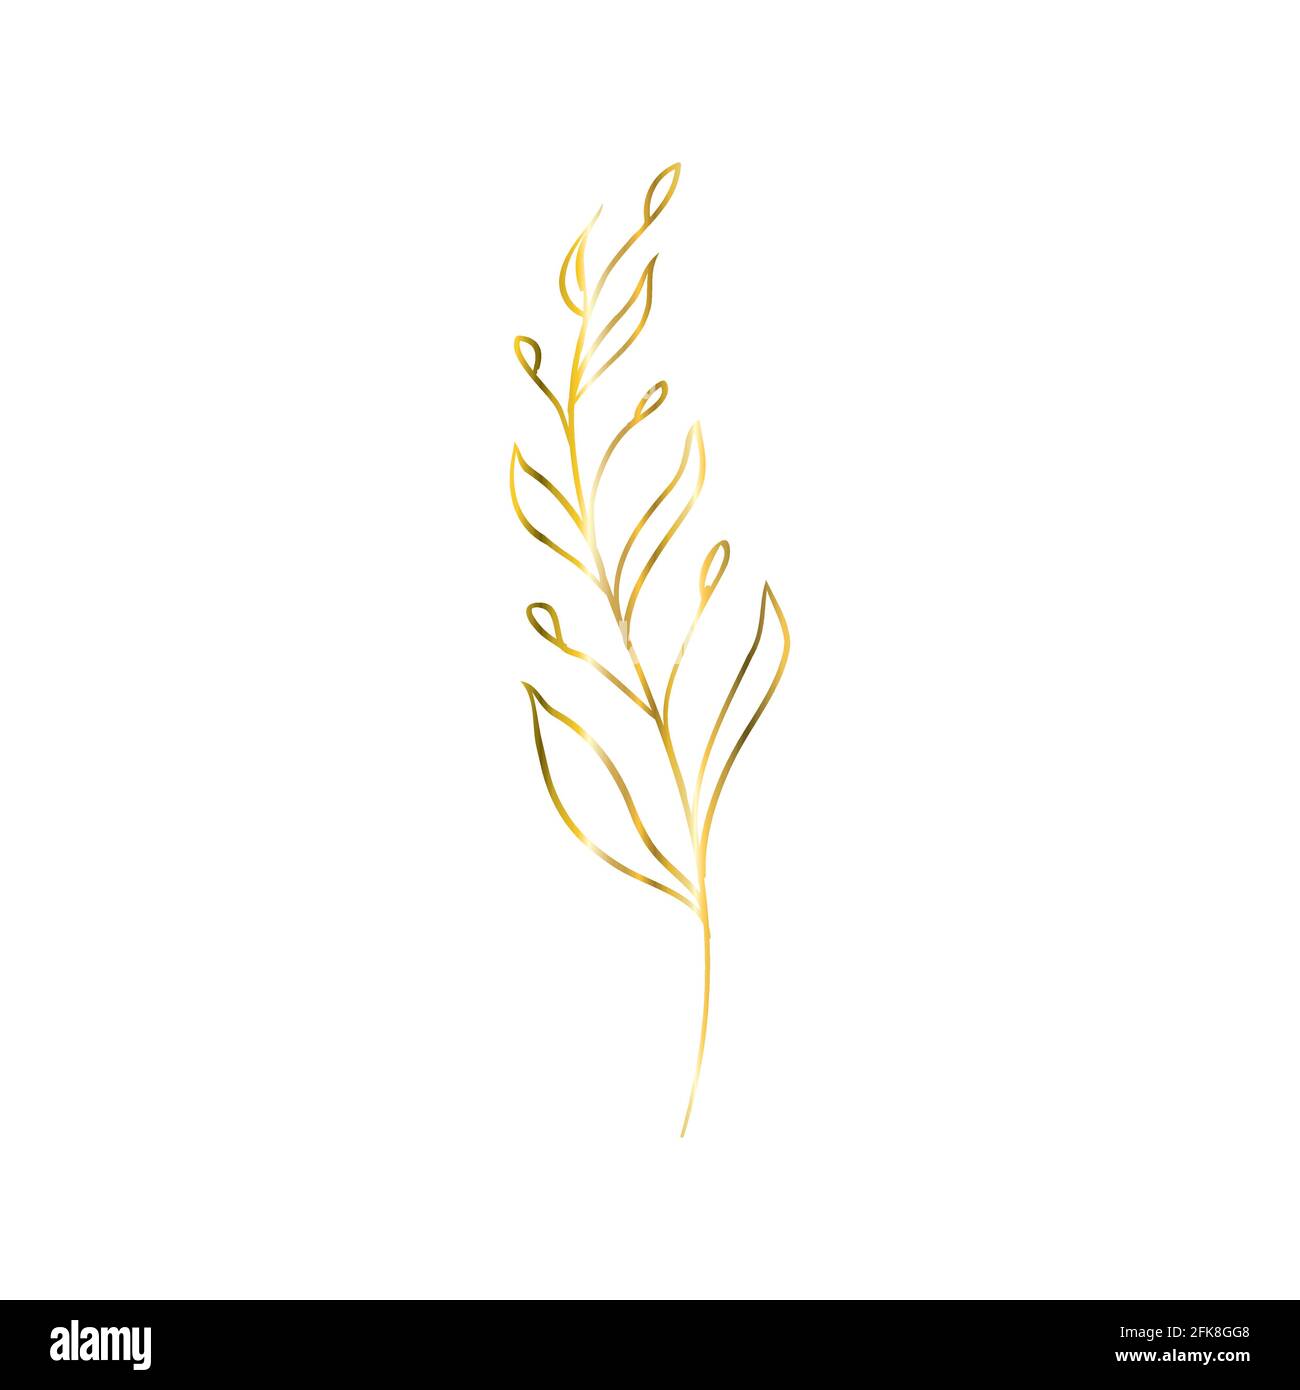 The golden sprig. Vector image with a golden twig. Template for the logo element. Editable geometric element isolated on white. Stock Vector